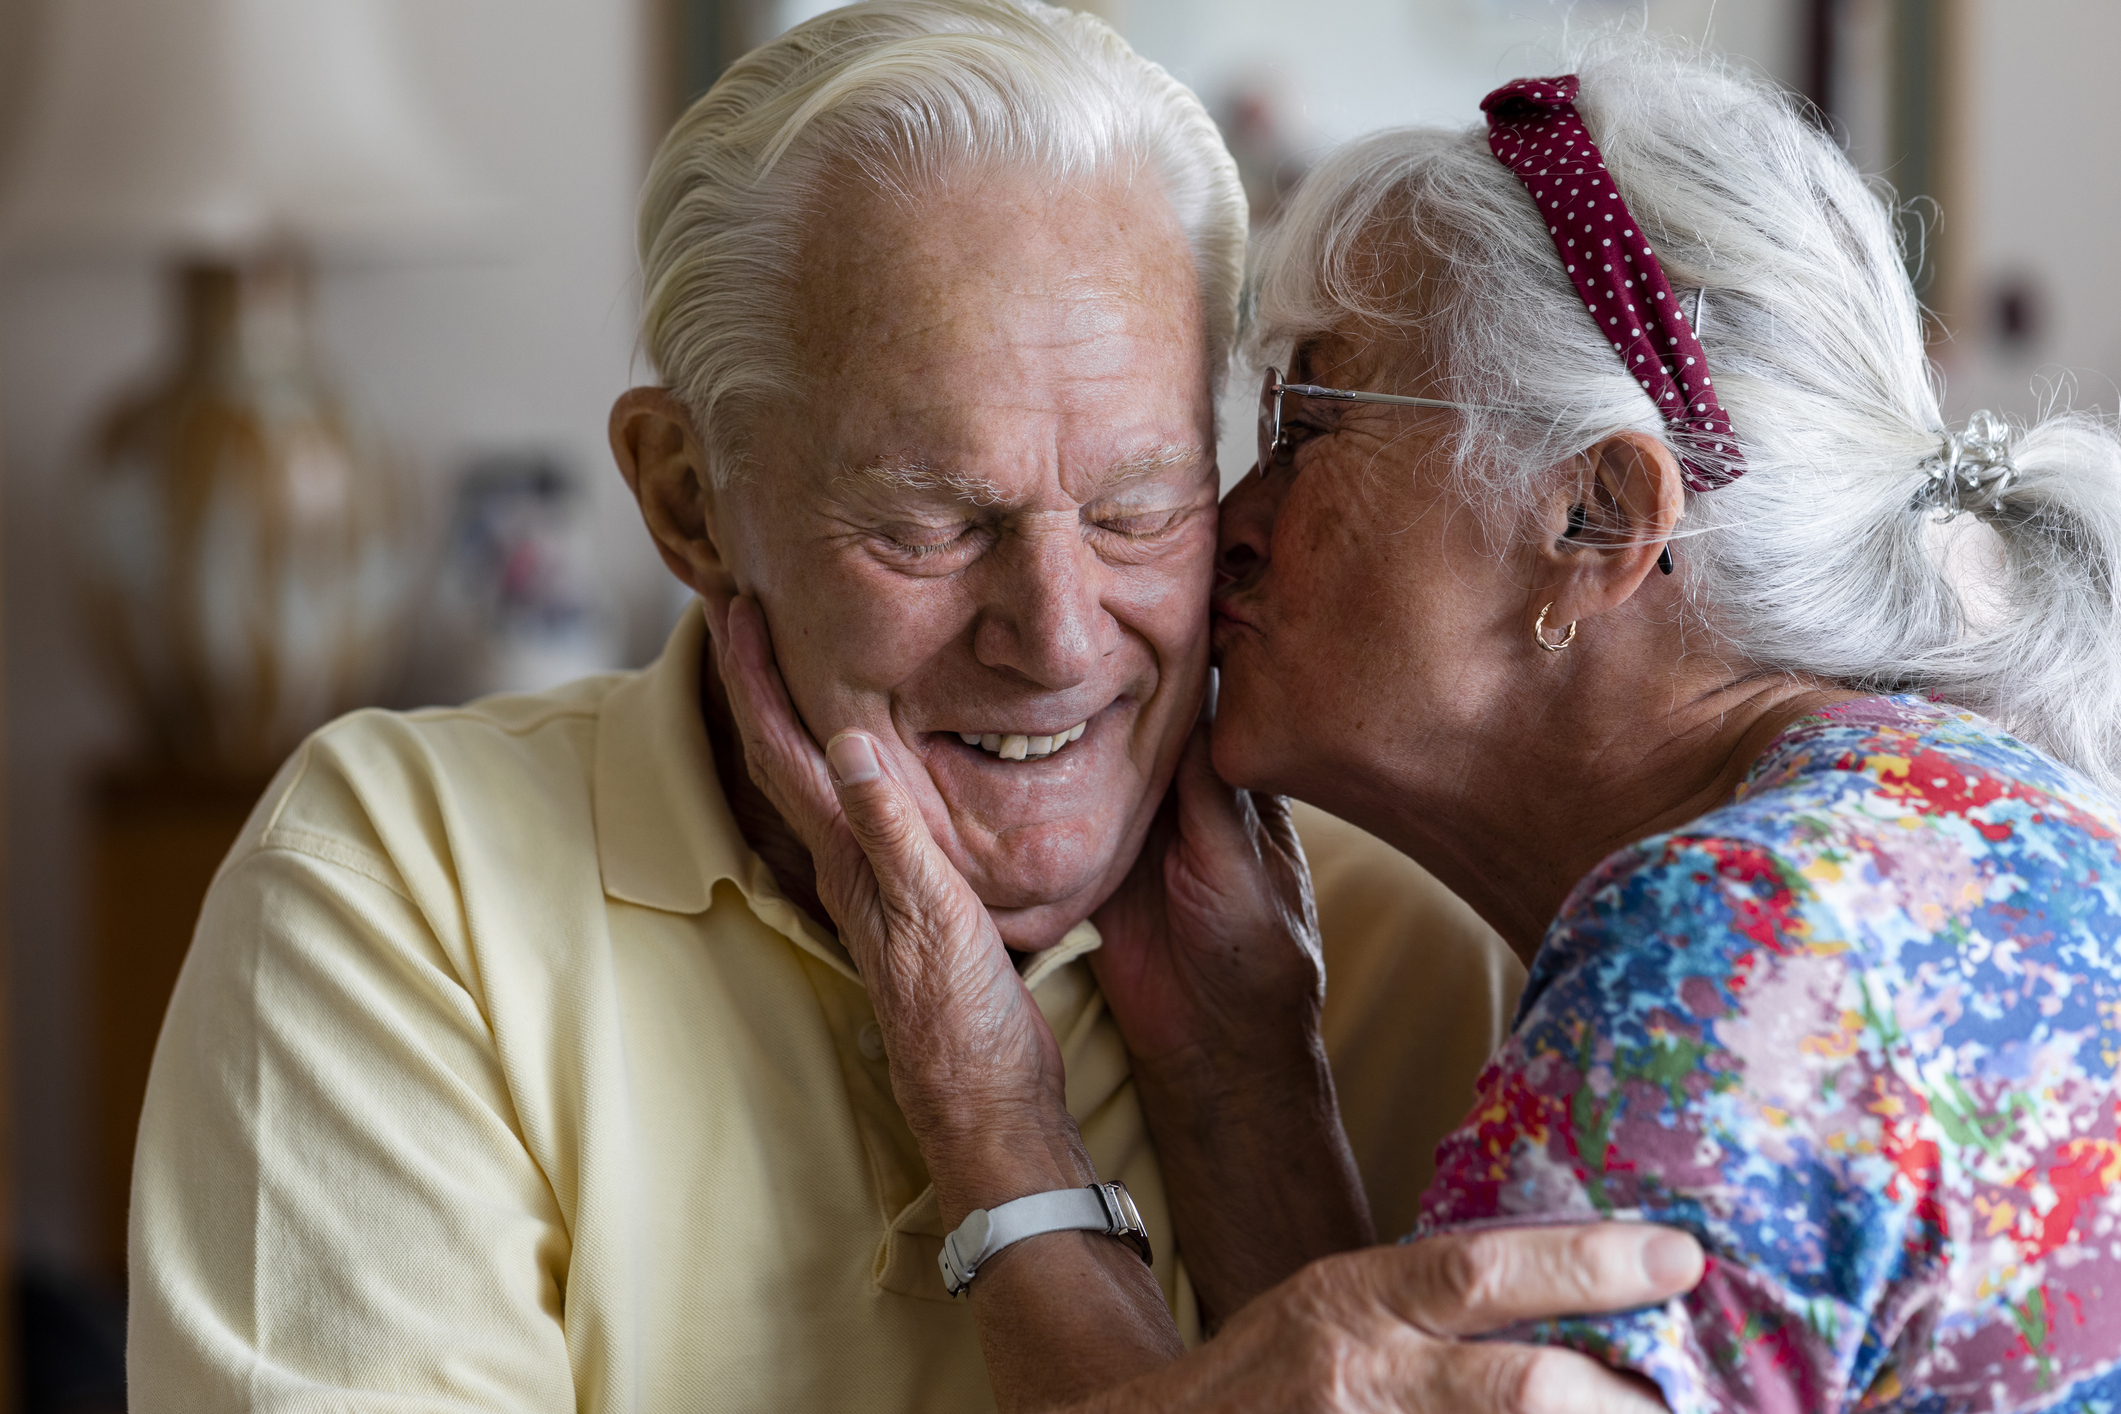 Senior couple at home in the North East of England. The wife is kissing her husband's cheek while he laughs with his eyes closed.